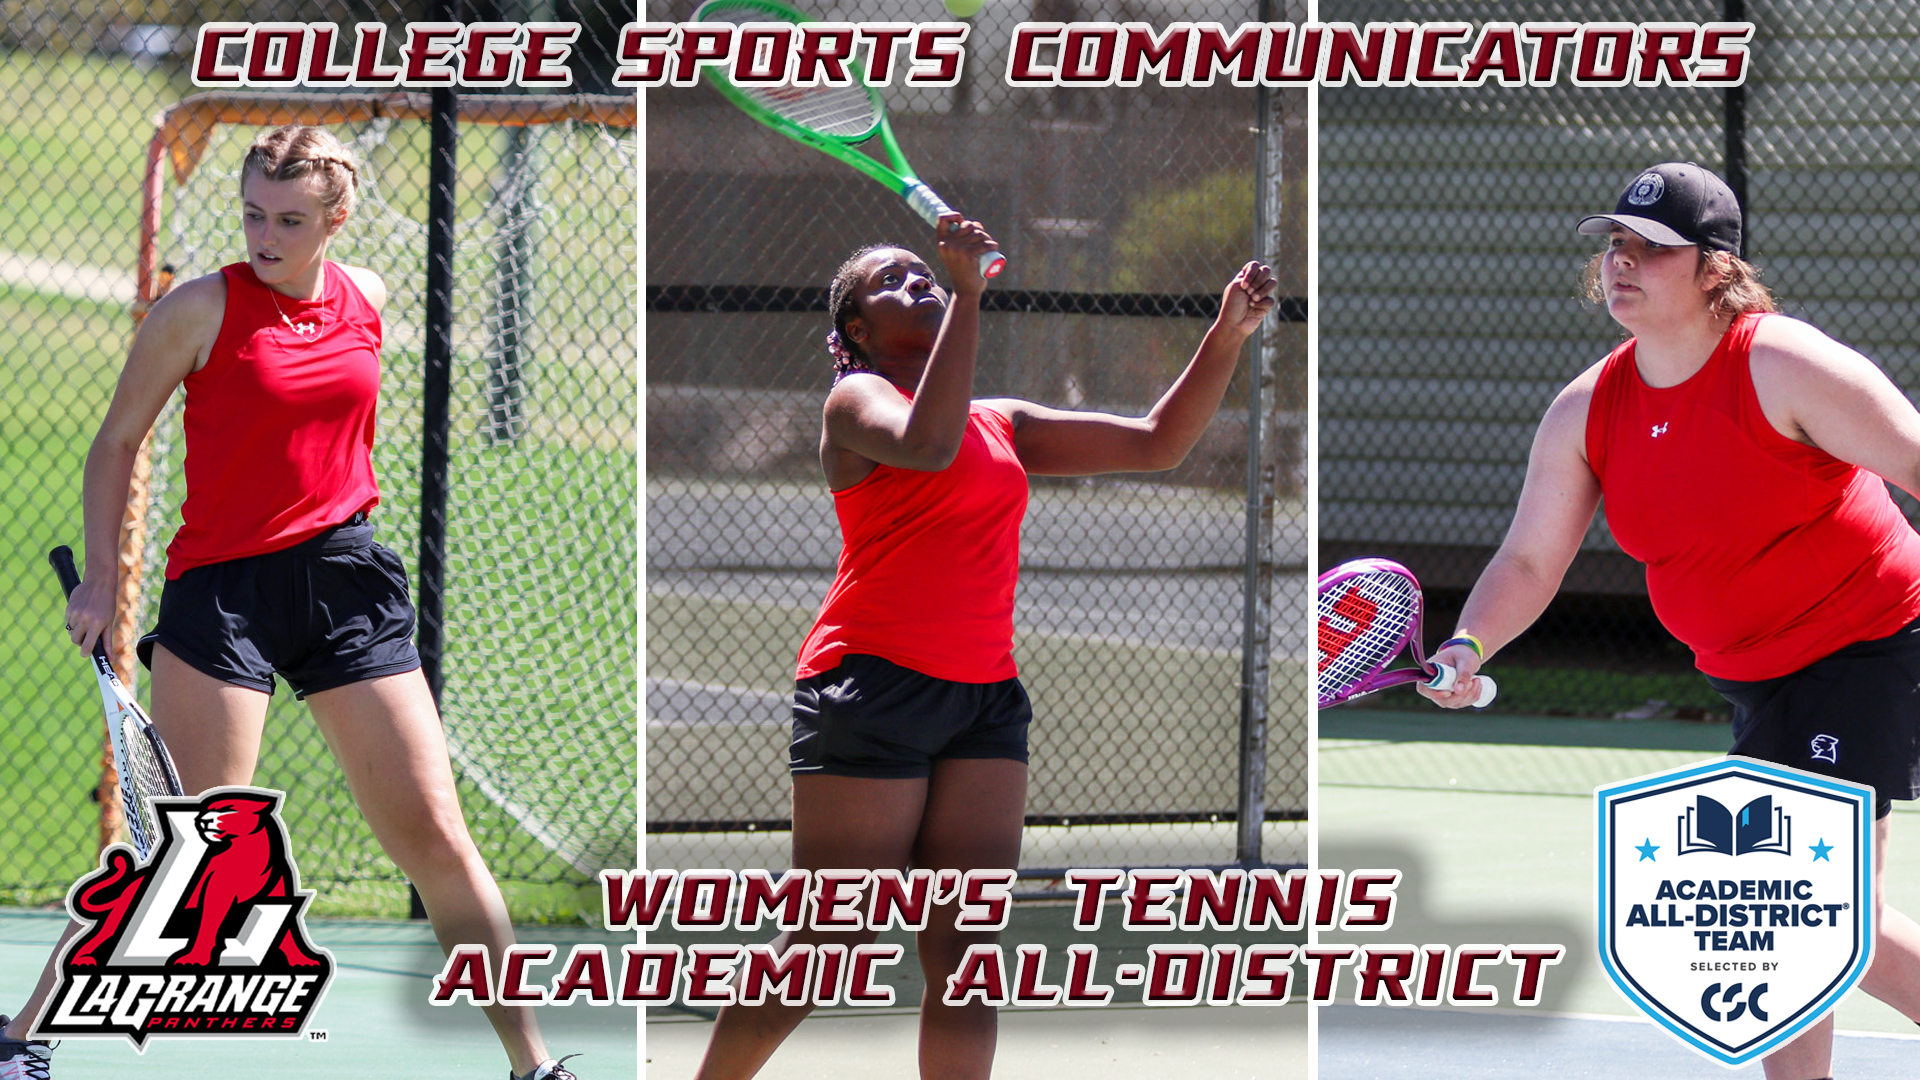 Tennis players recognized with Academic honors